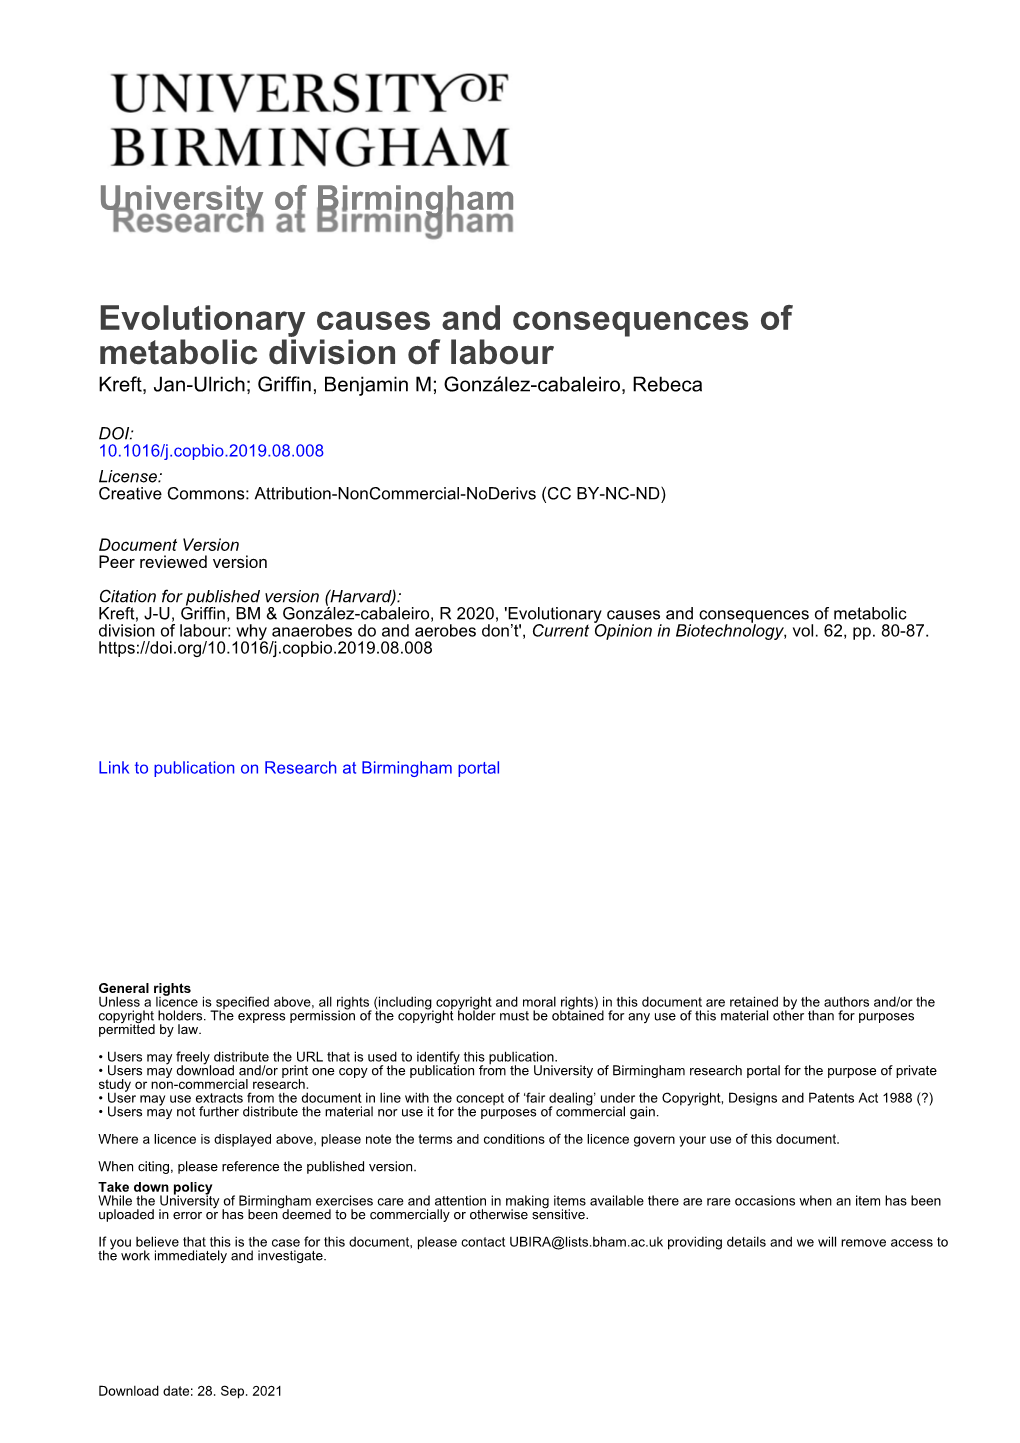 University of Birmingham Evolutionary Causes and Consequences of Metabolic Division of Labour